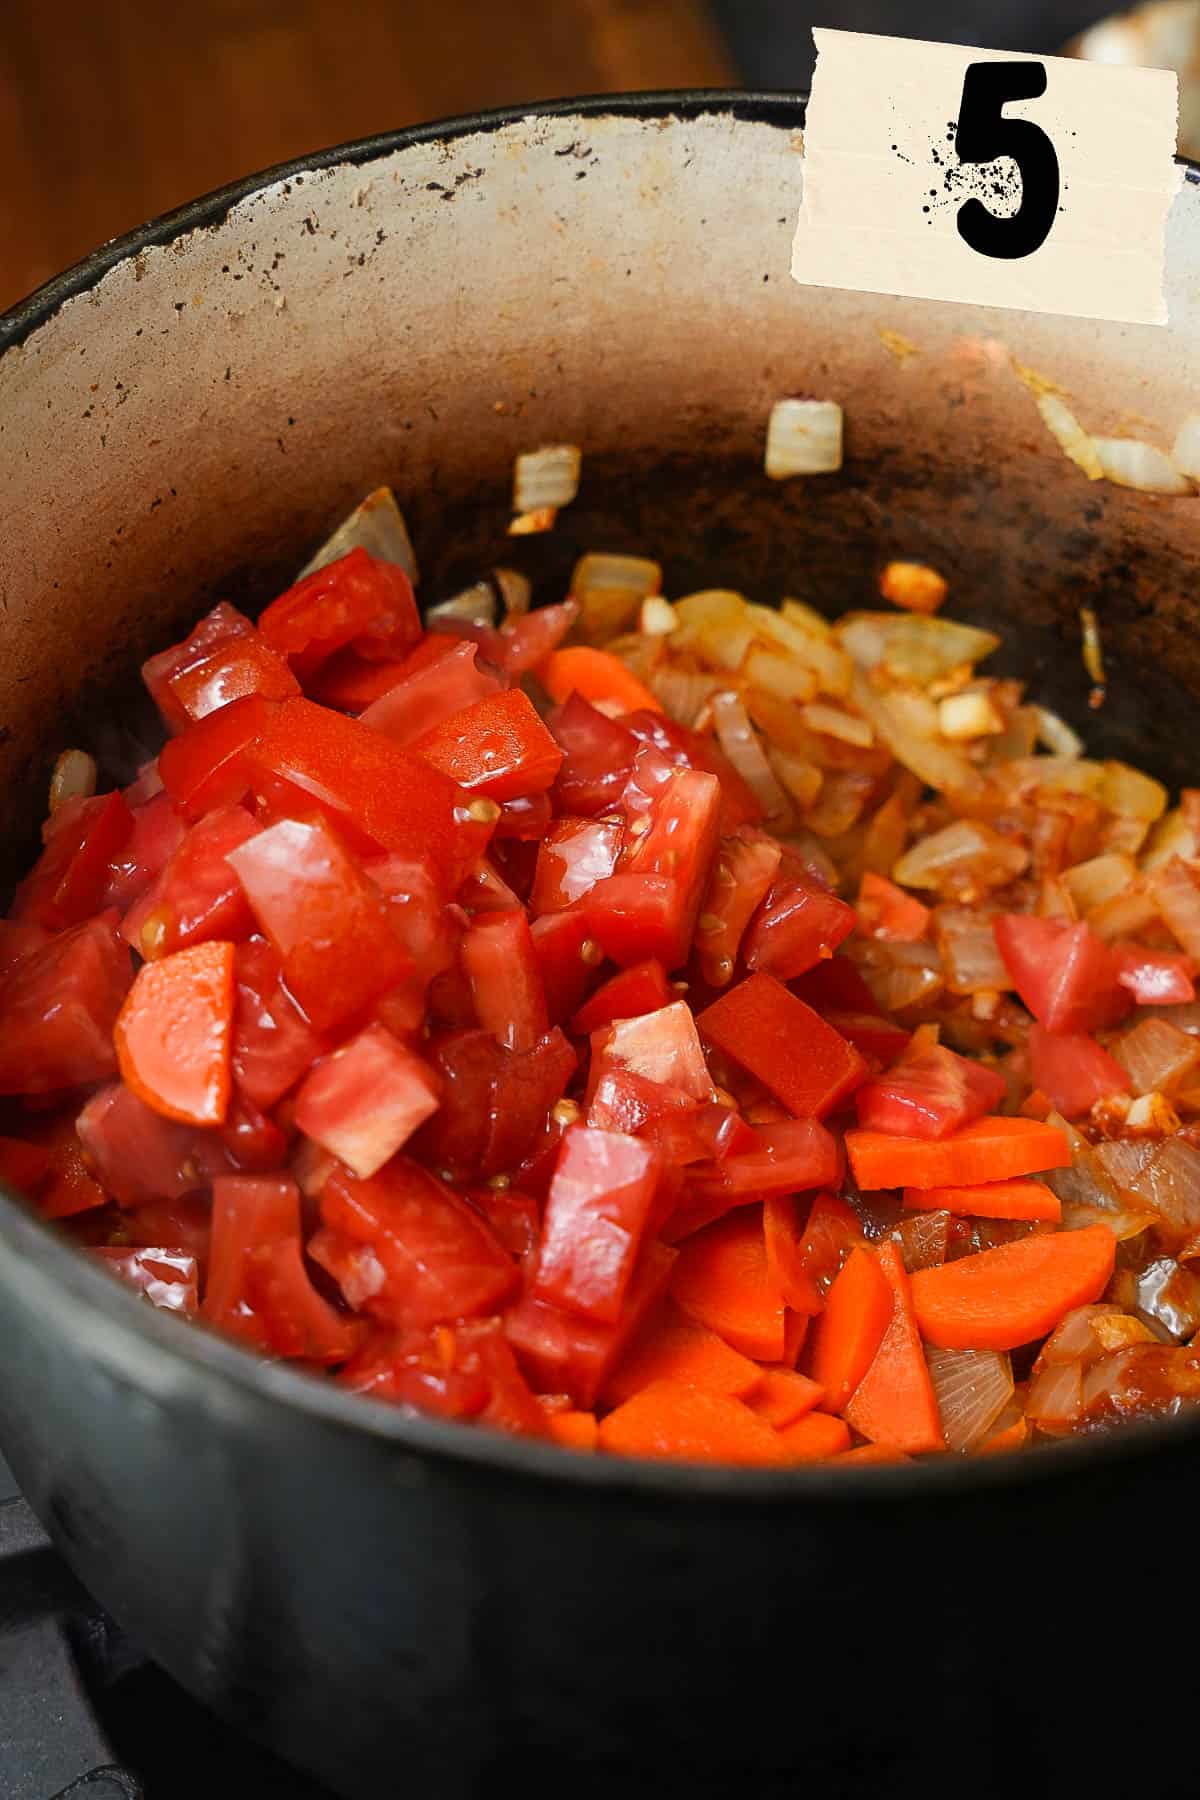 Tomatoes and carrots added to the pot on the stove.